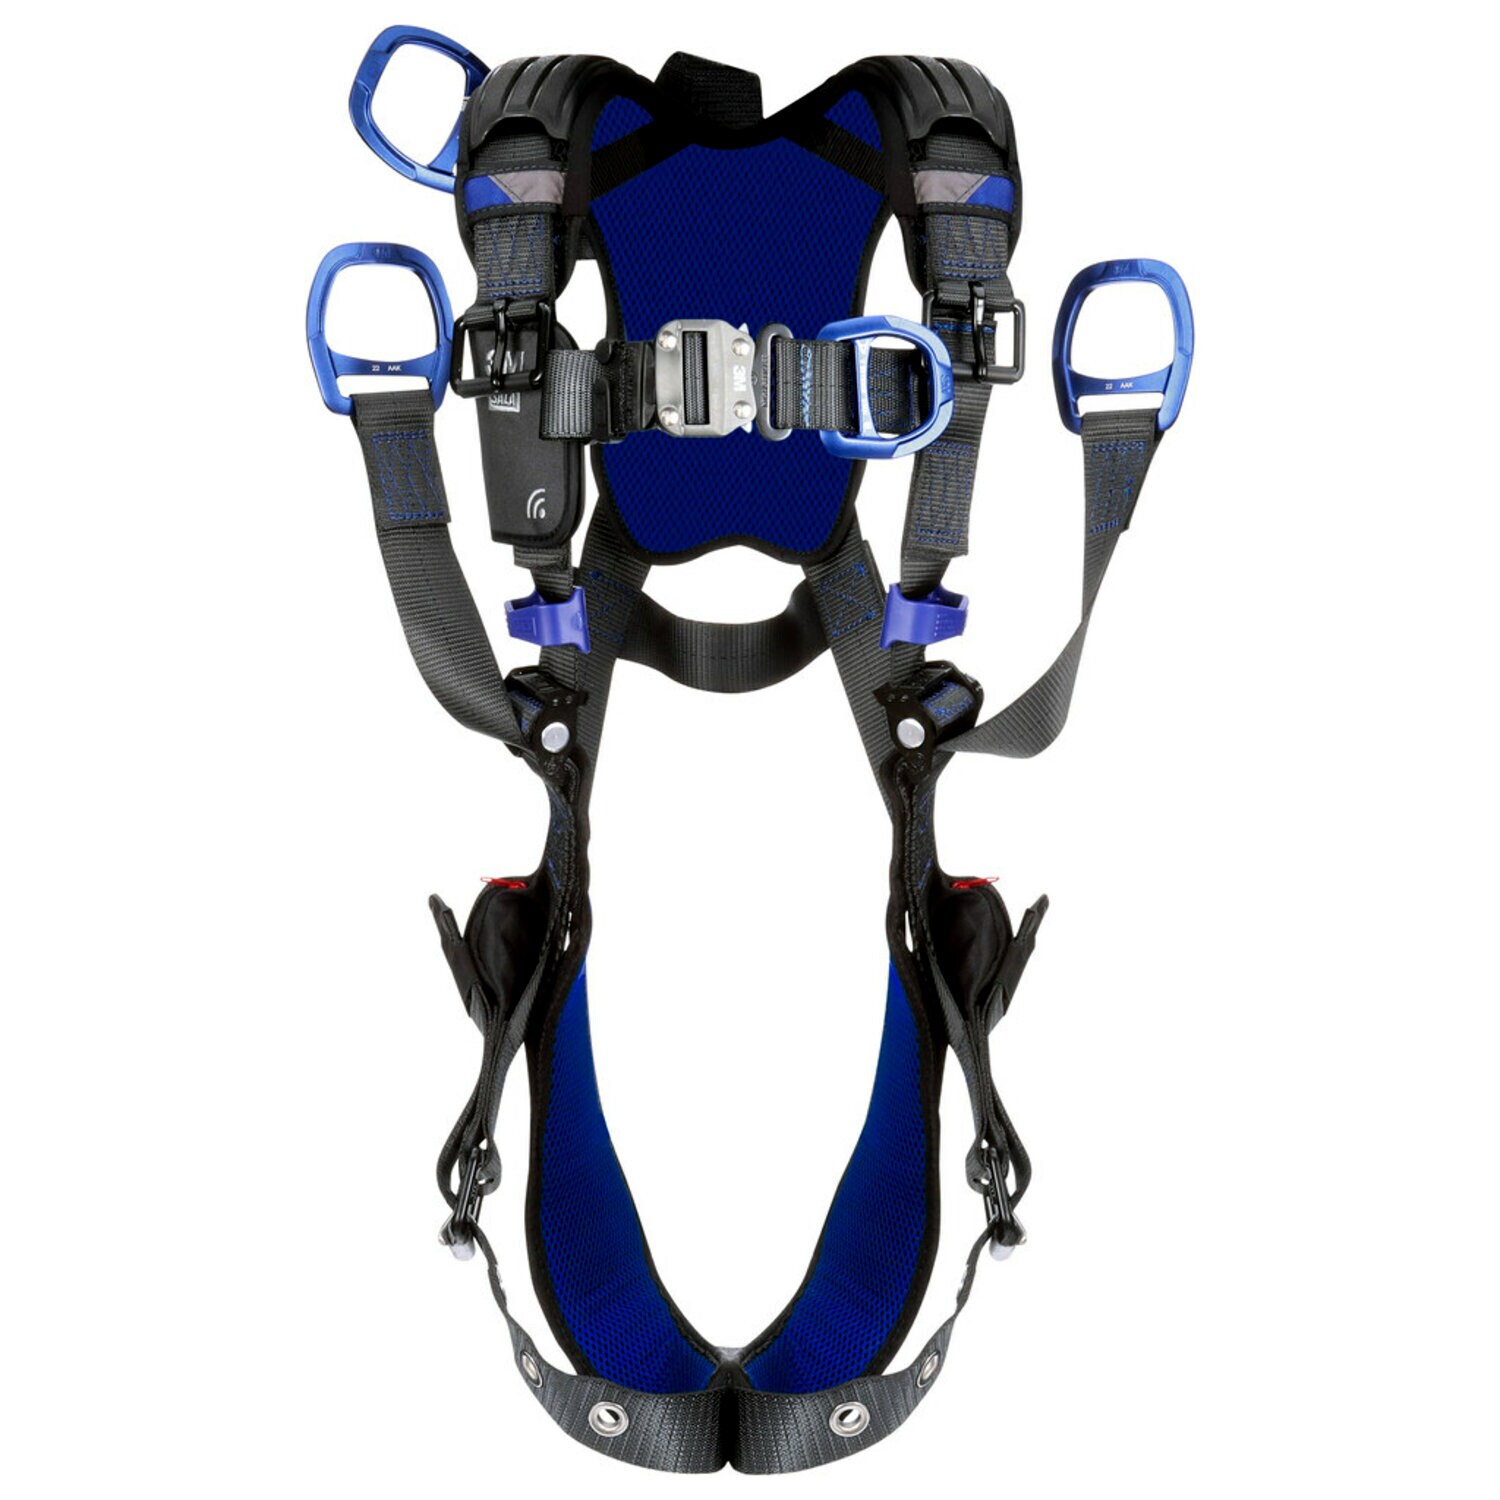 7012818054 - 3M DBI-SALA ExoFit X300 Comfort Oil and Gas Climbing/Lifting Safety Harness with Tongue Buckle Belt Connector 1403227, 2X